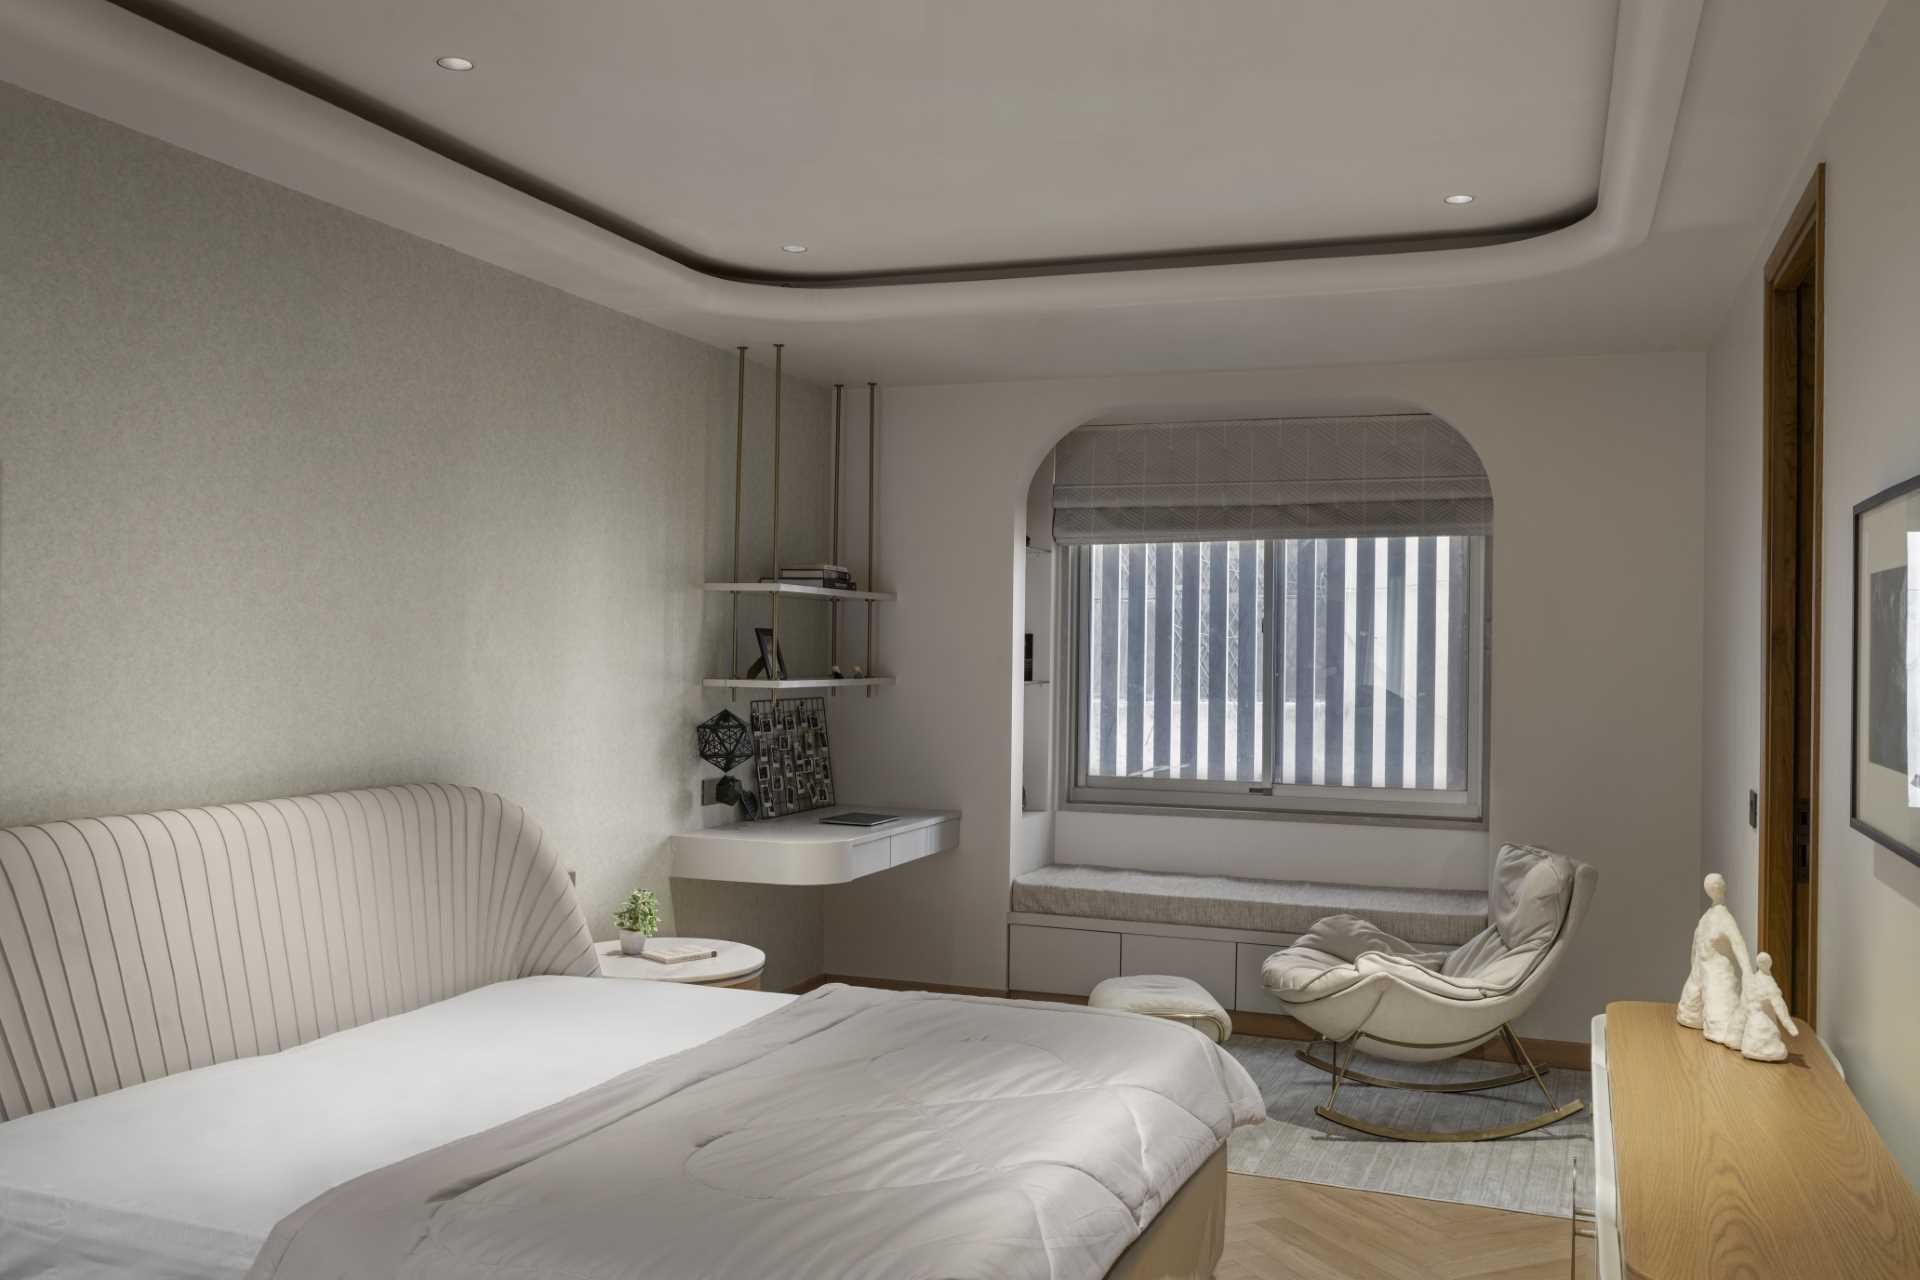 A contemporary bedroom with a floating desk and window seat.